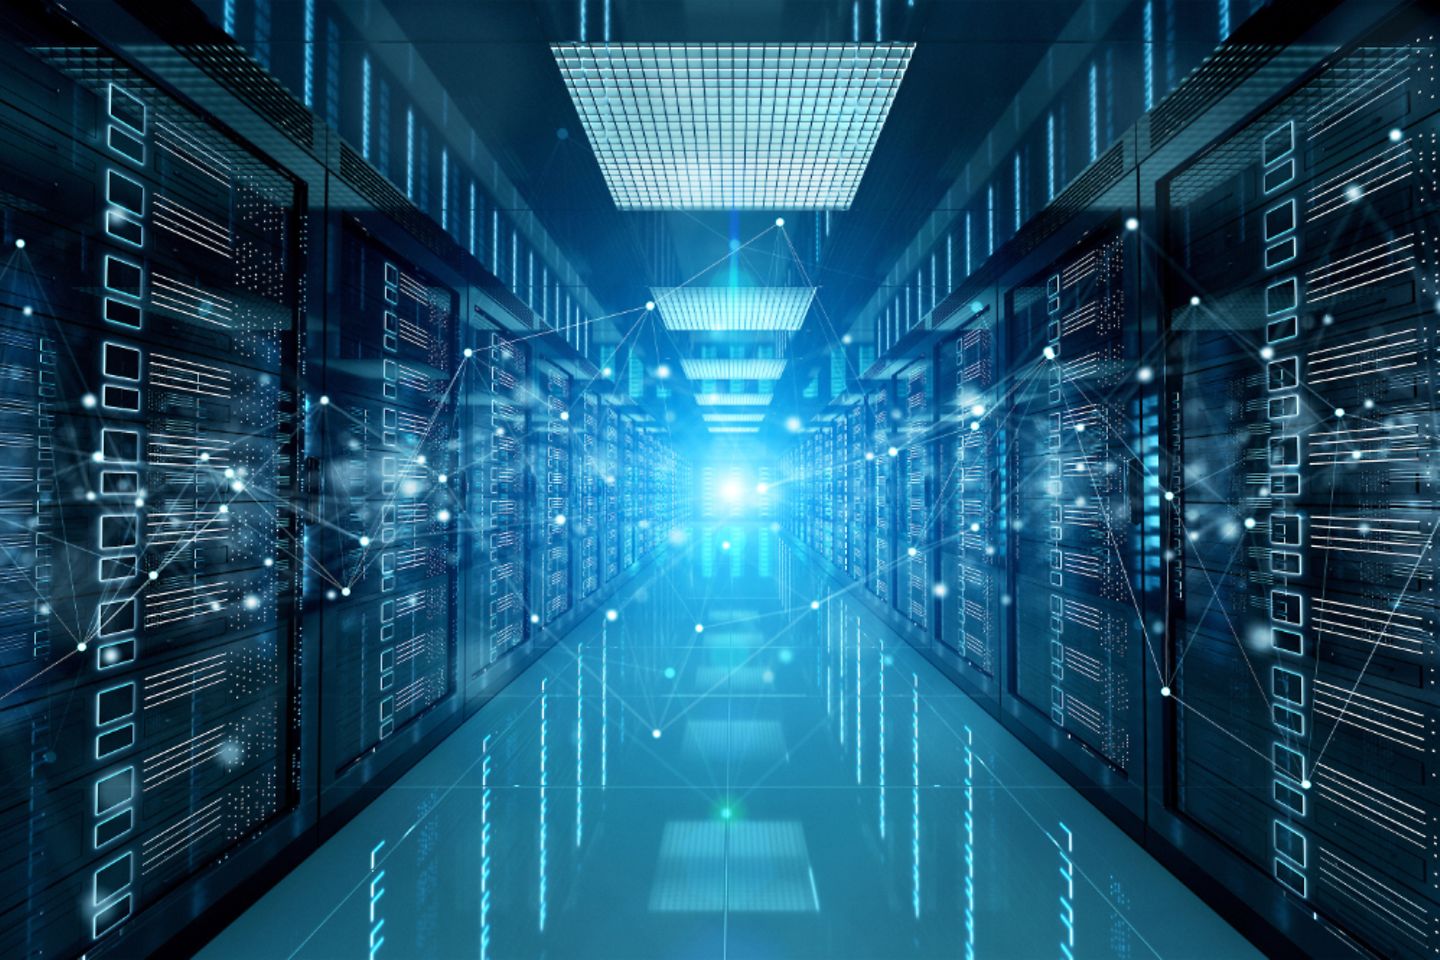 3D rendering of server network connections in a data centre room